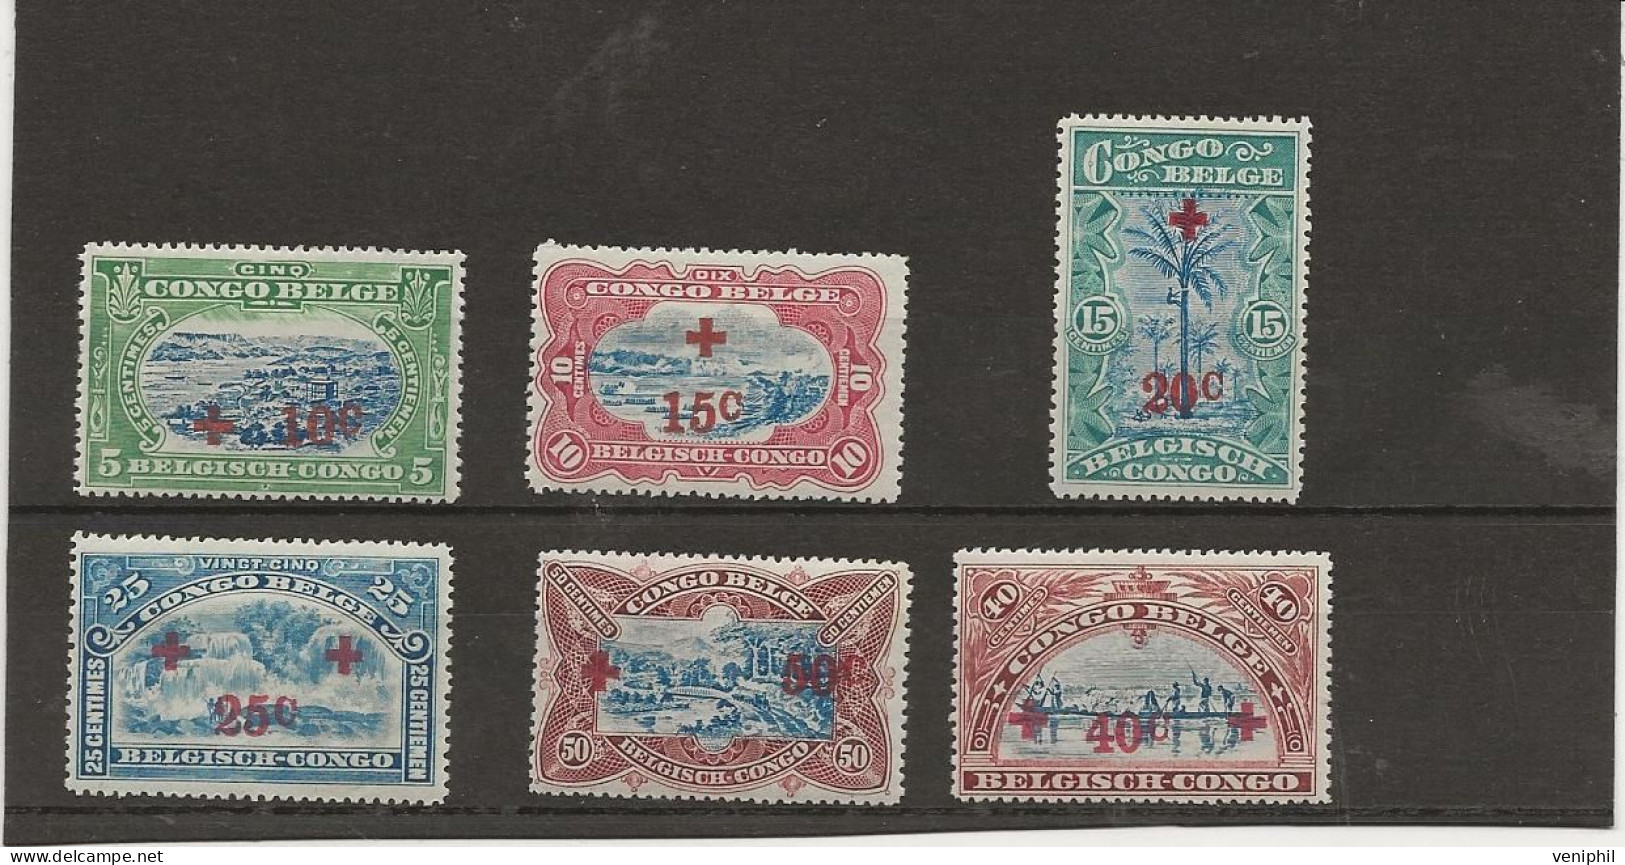 CONGO BELGE  - N° 72 A 77 NEUF CHARNIERE  - SURCHRGE CROIX ROUGE -ANNEE 1918 - Unused Stamps